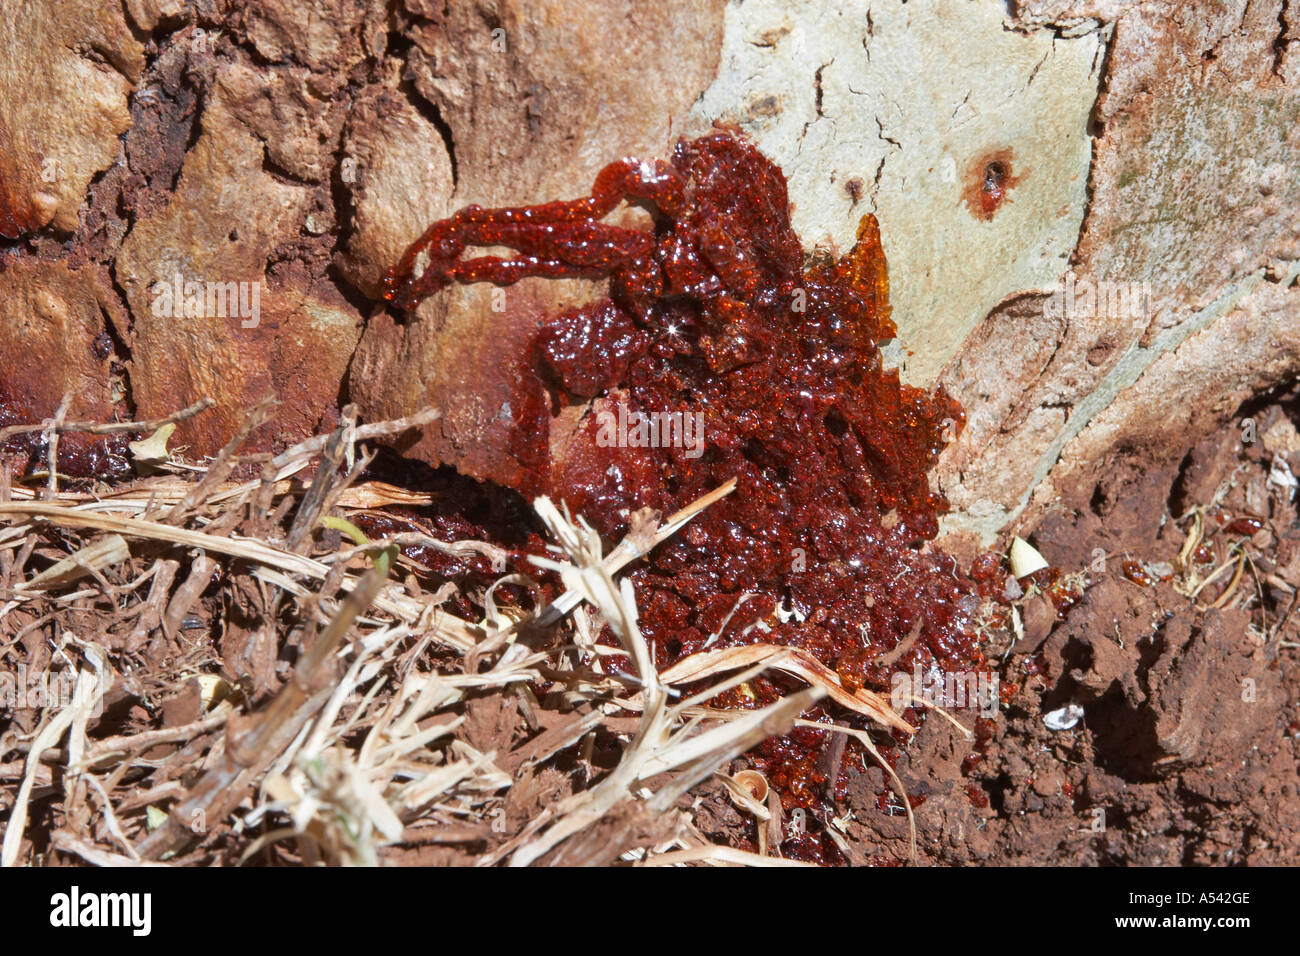 Reddish resin comes out of the bloodwood tree Brosimum rubescens Stock Photo